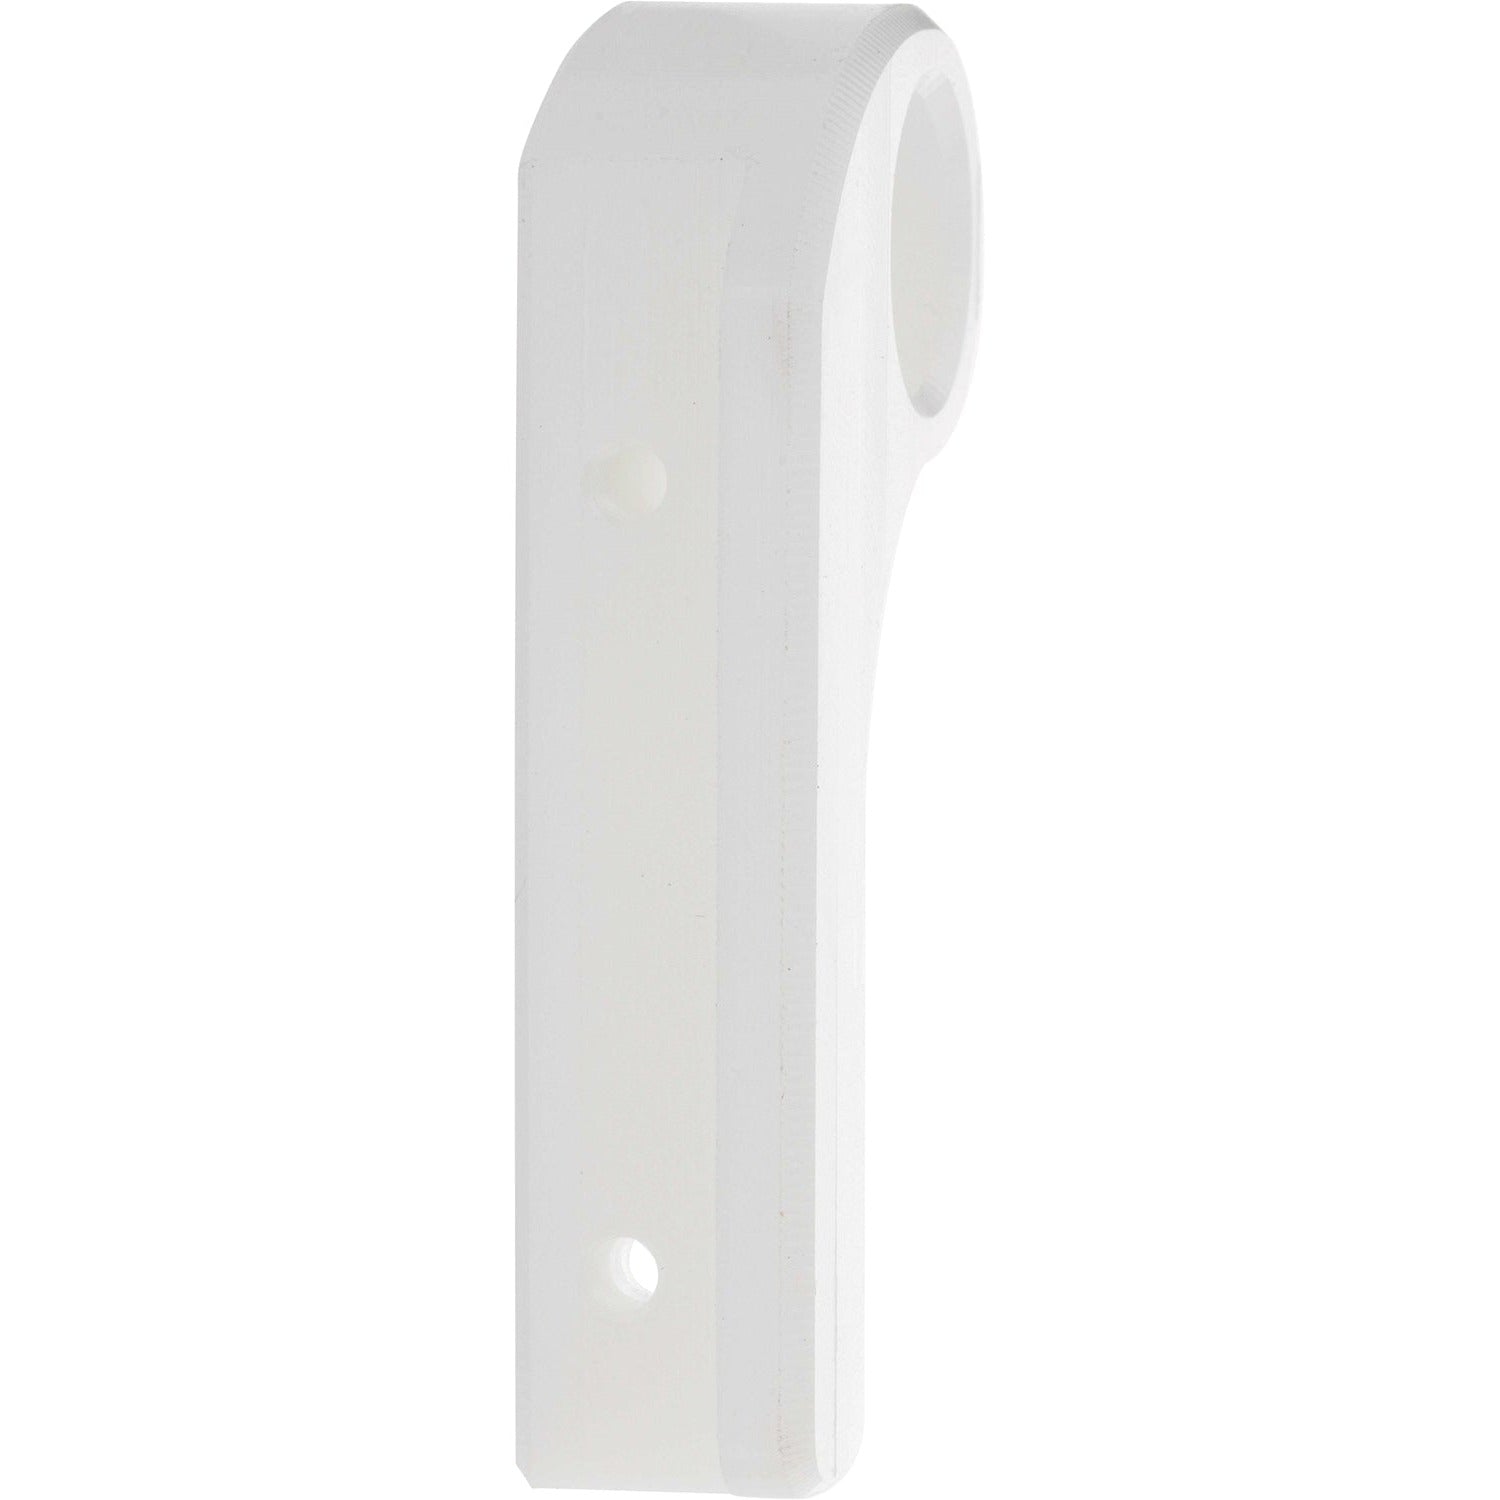 White plastic machined part with two threaded holes shown on white background. 